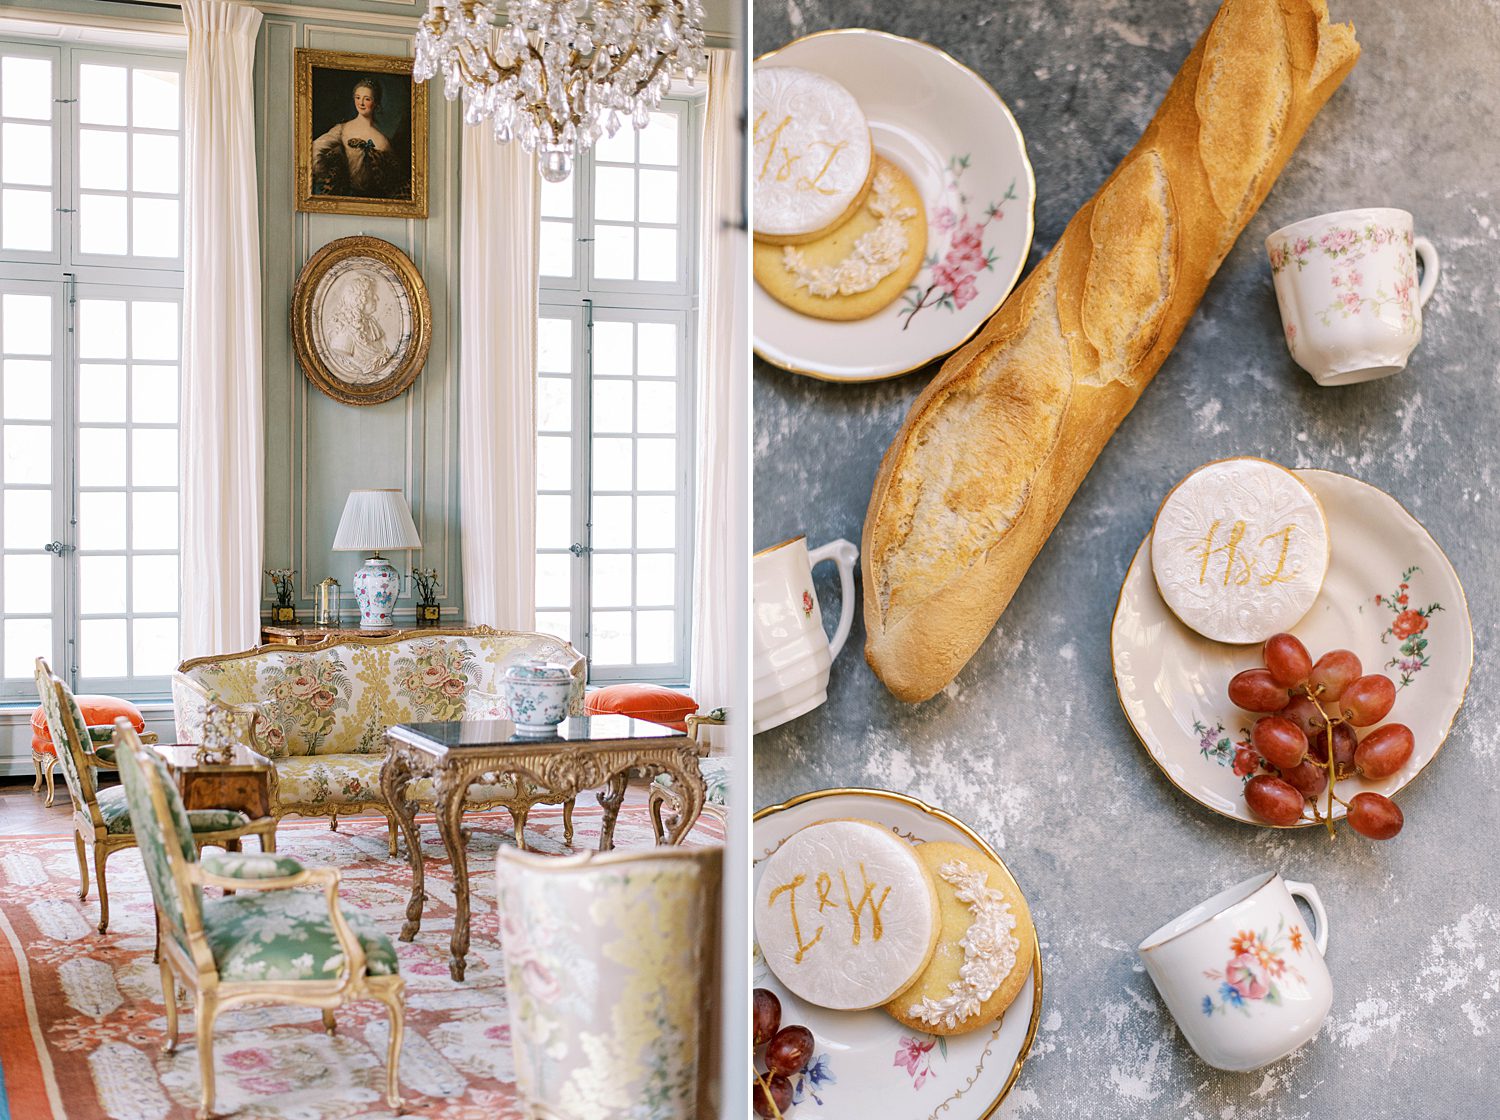 French breakfast for wedding day at Chateau de Villette